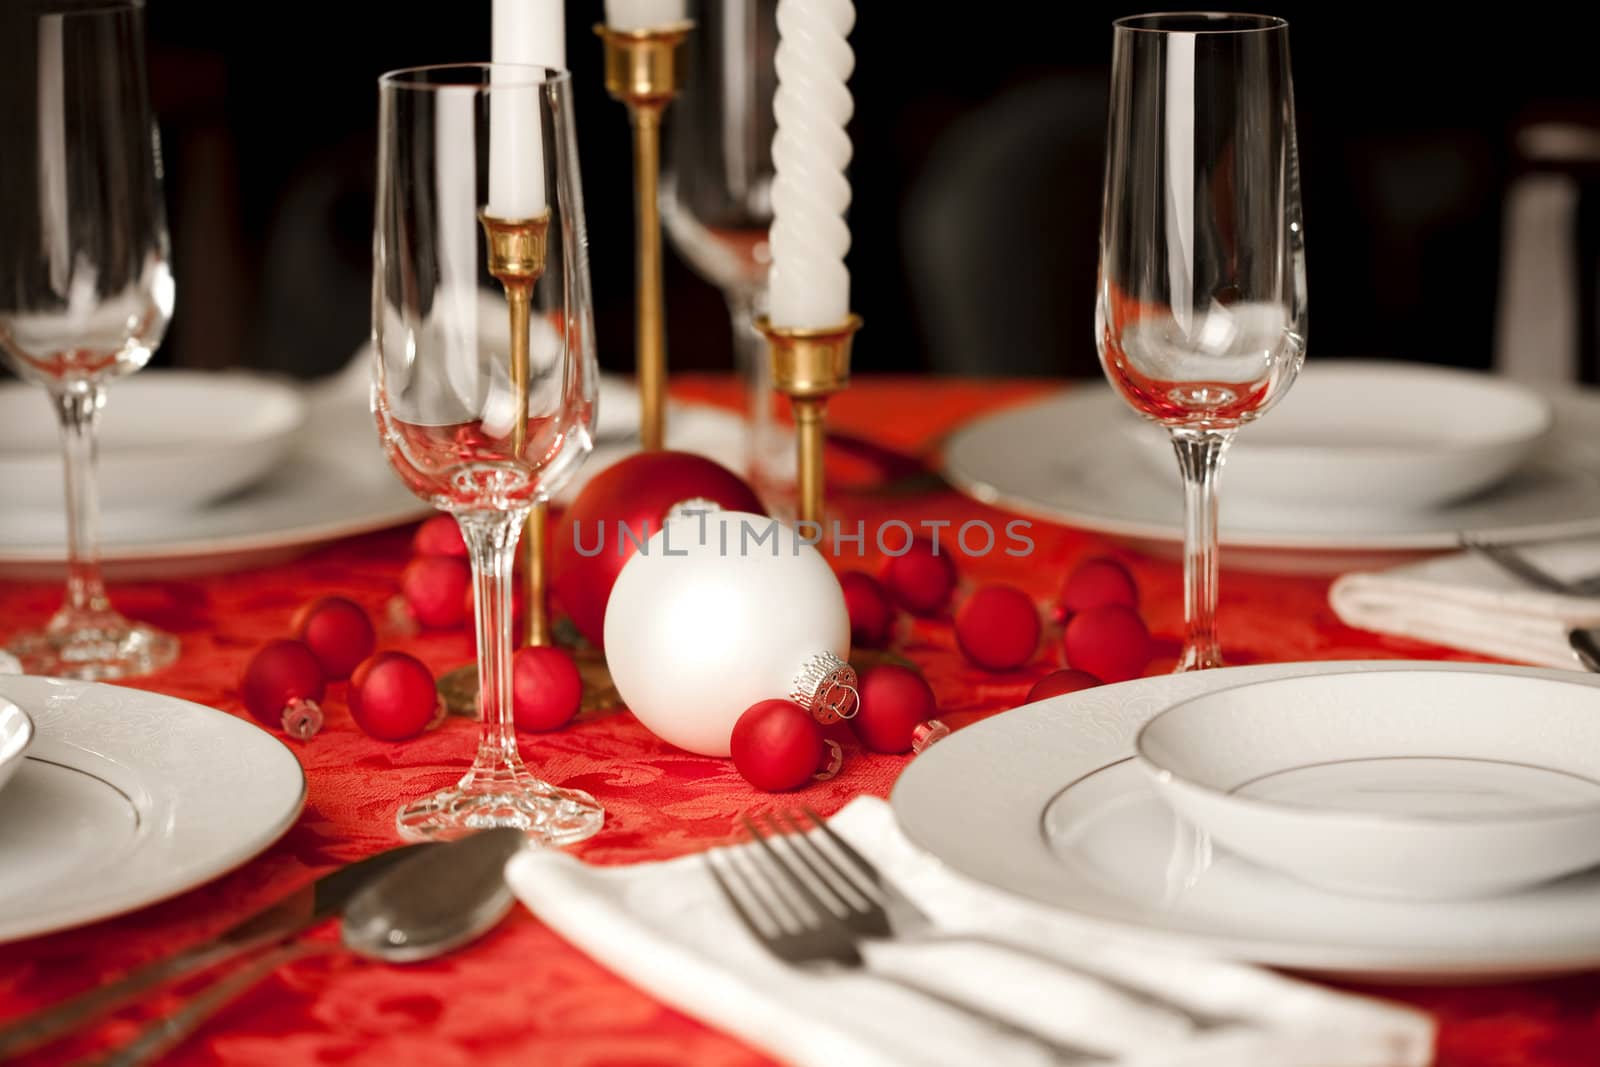 Red and white Christmas table setting, shallow depth of field, focus on ornament